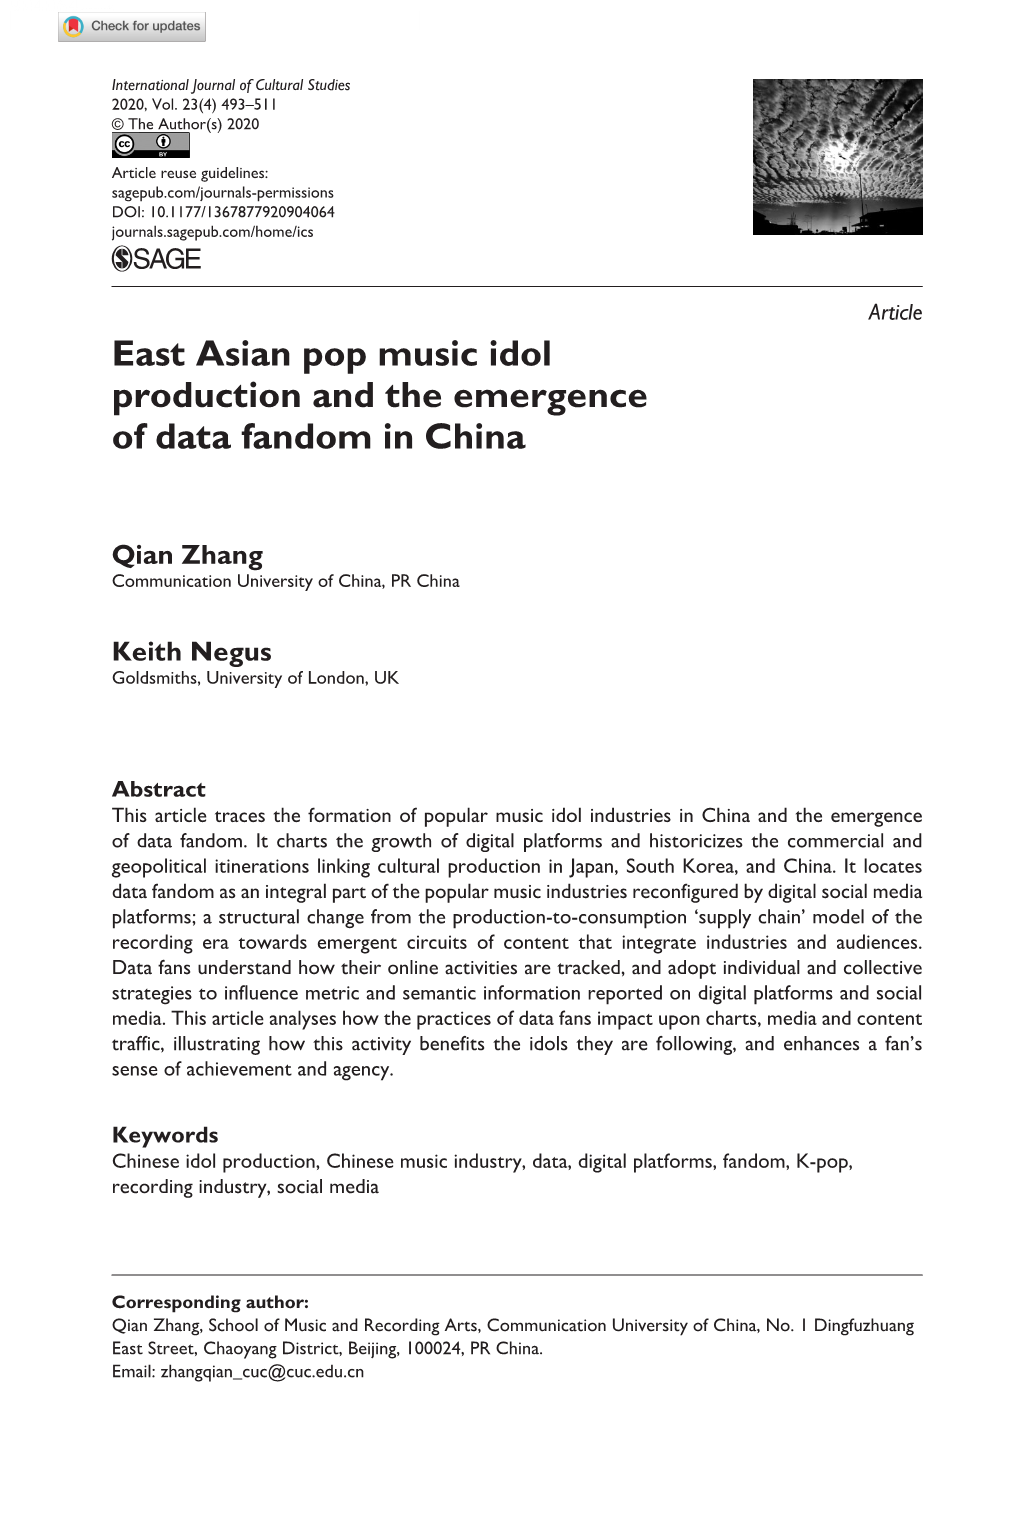 East Asian Pop Music Idol Production and the Emergence of Data Fandom in China